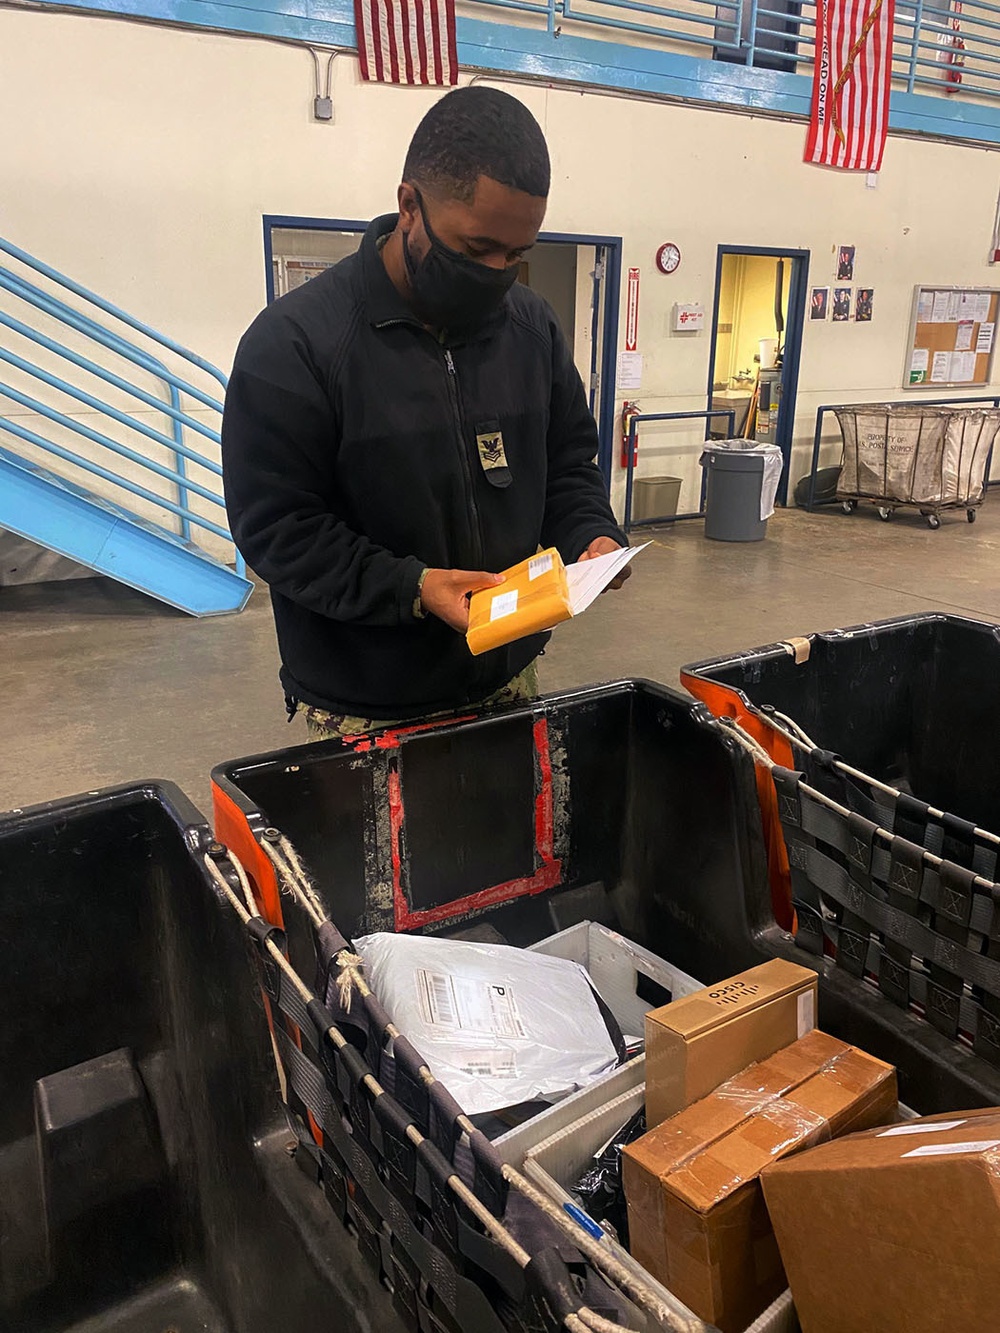 Navy retail specialists transition to postal technicians